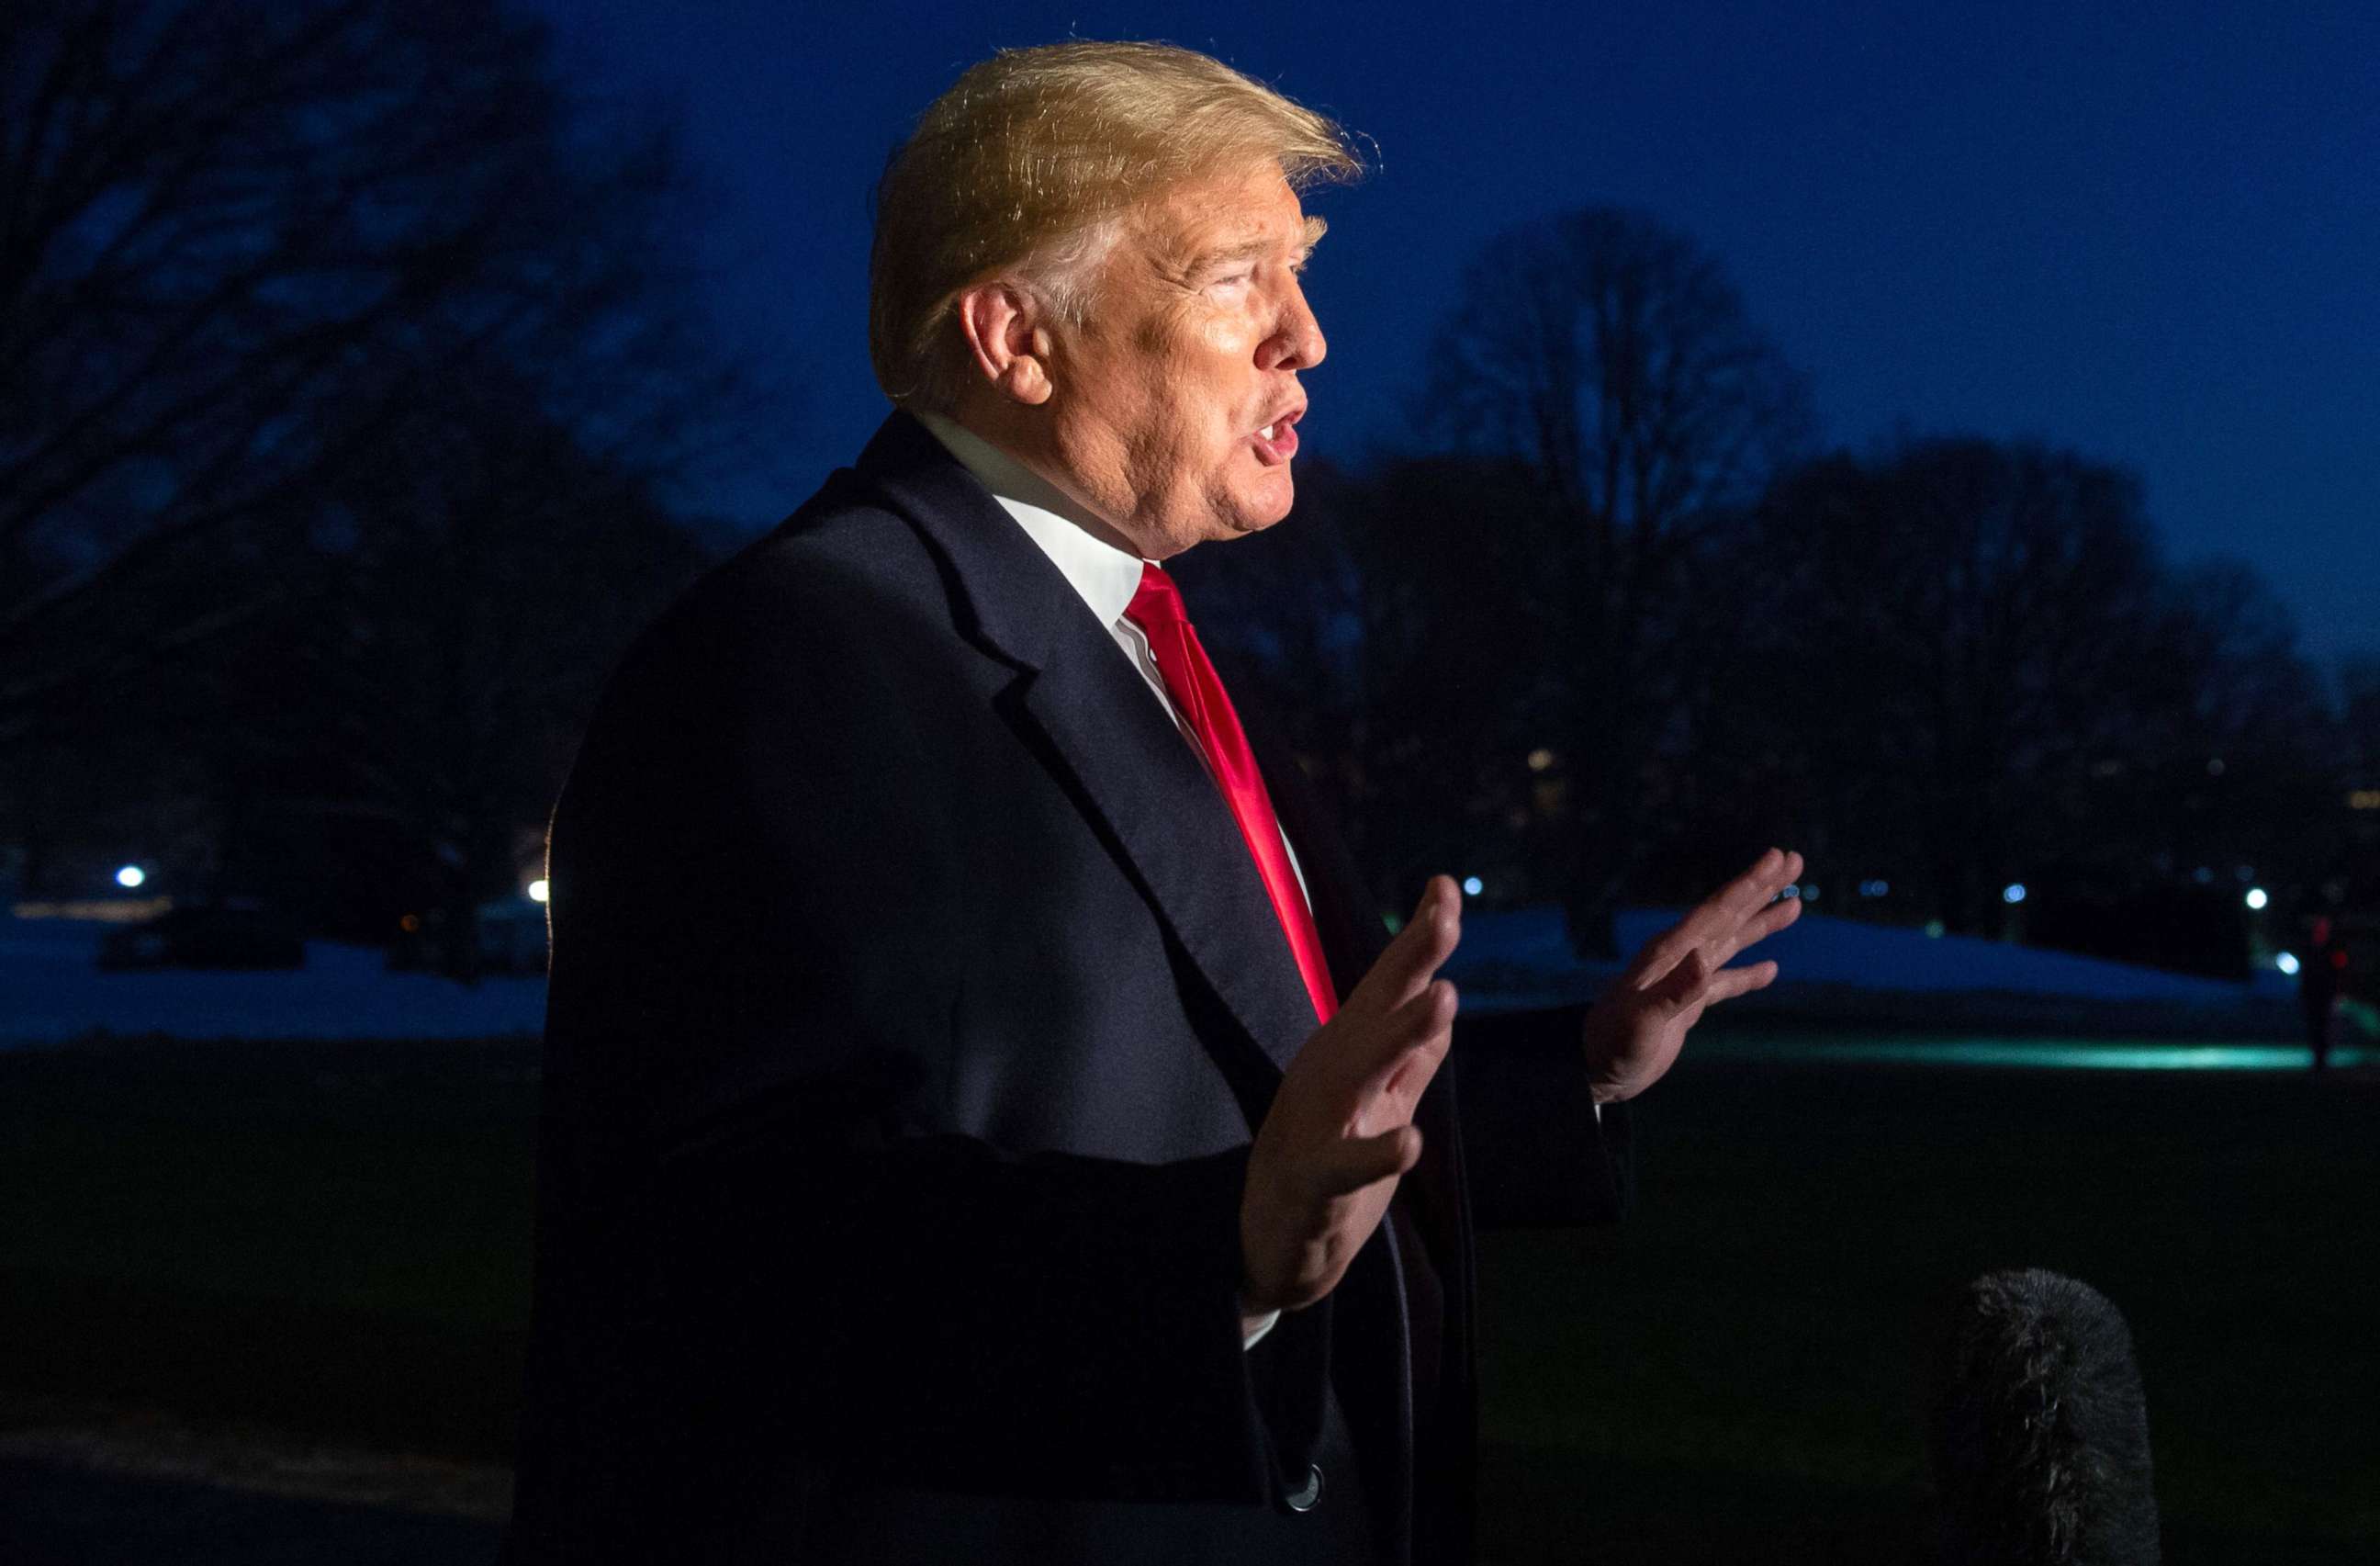 PHOTO: President Donald Trump speaks to the media on the South Lawn of the White House, Jan. 14, 2019.